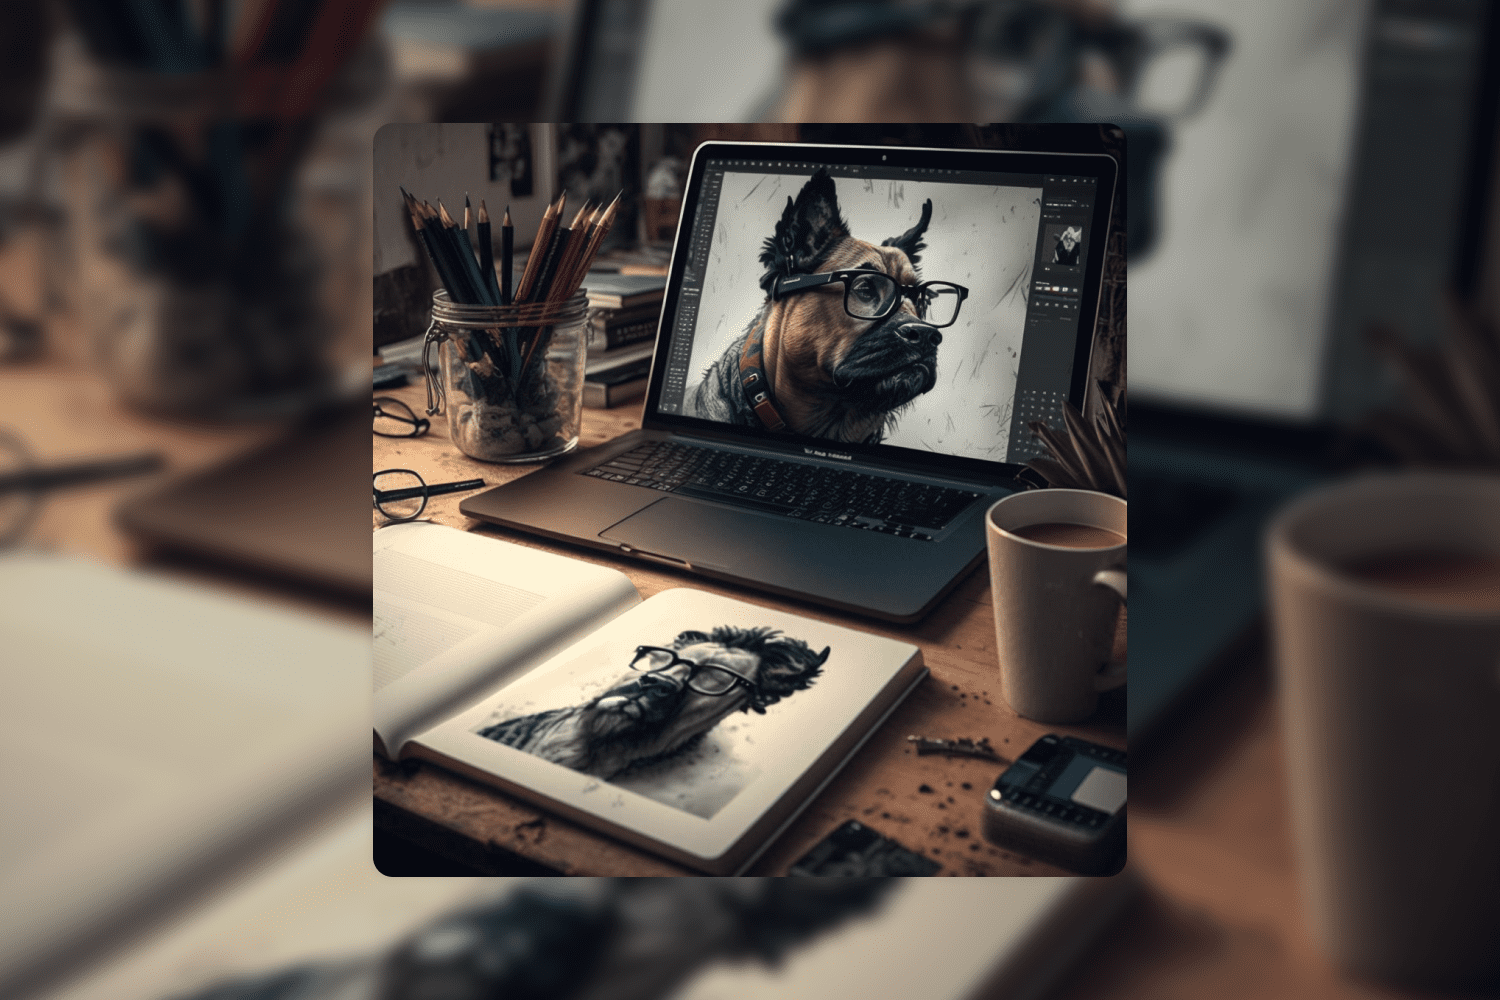 Drawing of a dog with glasses on the laptop screen on the table.